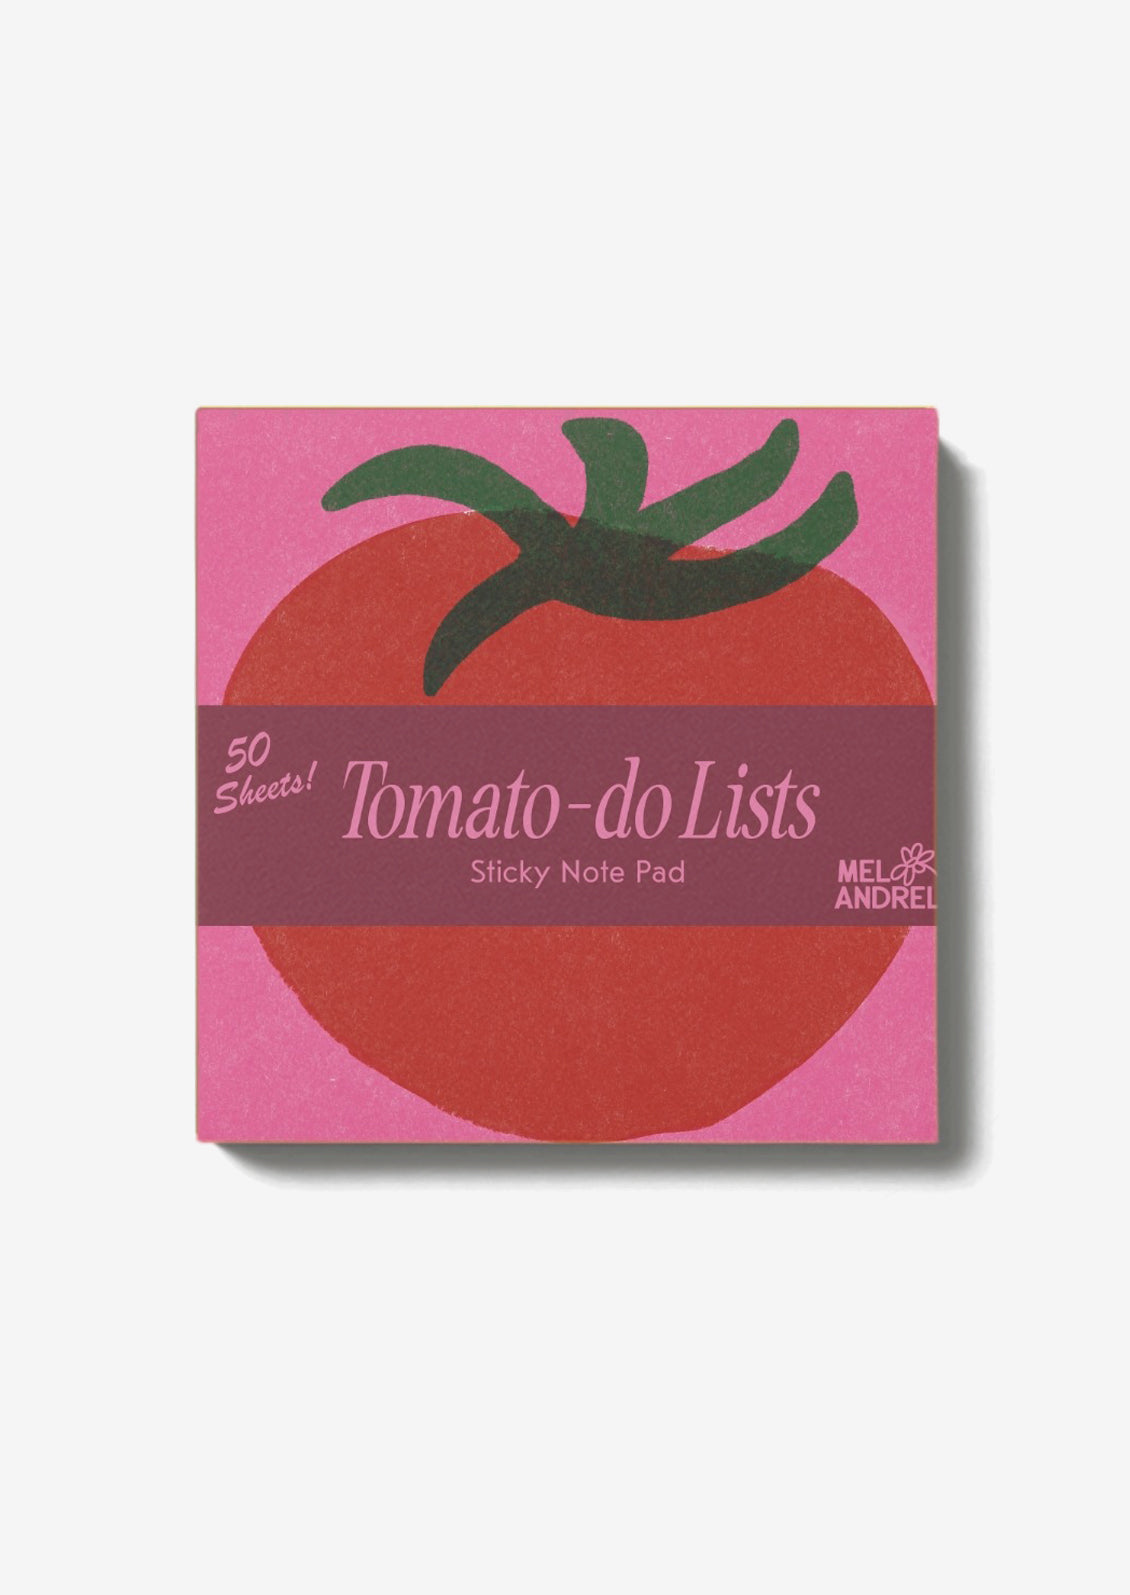 A stack of sticky notes with printed tomato theme.